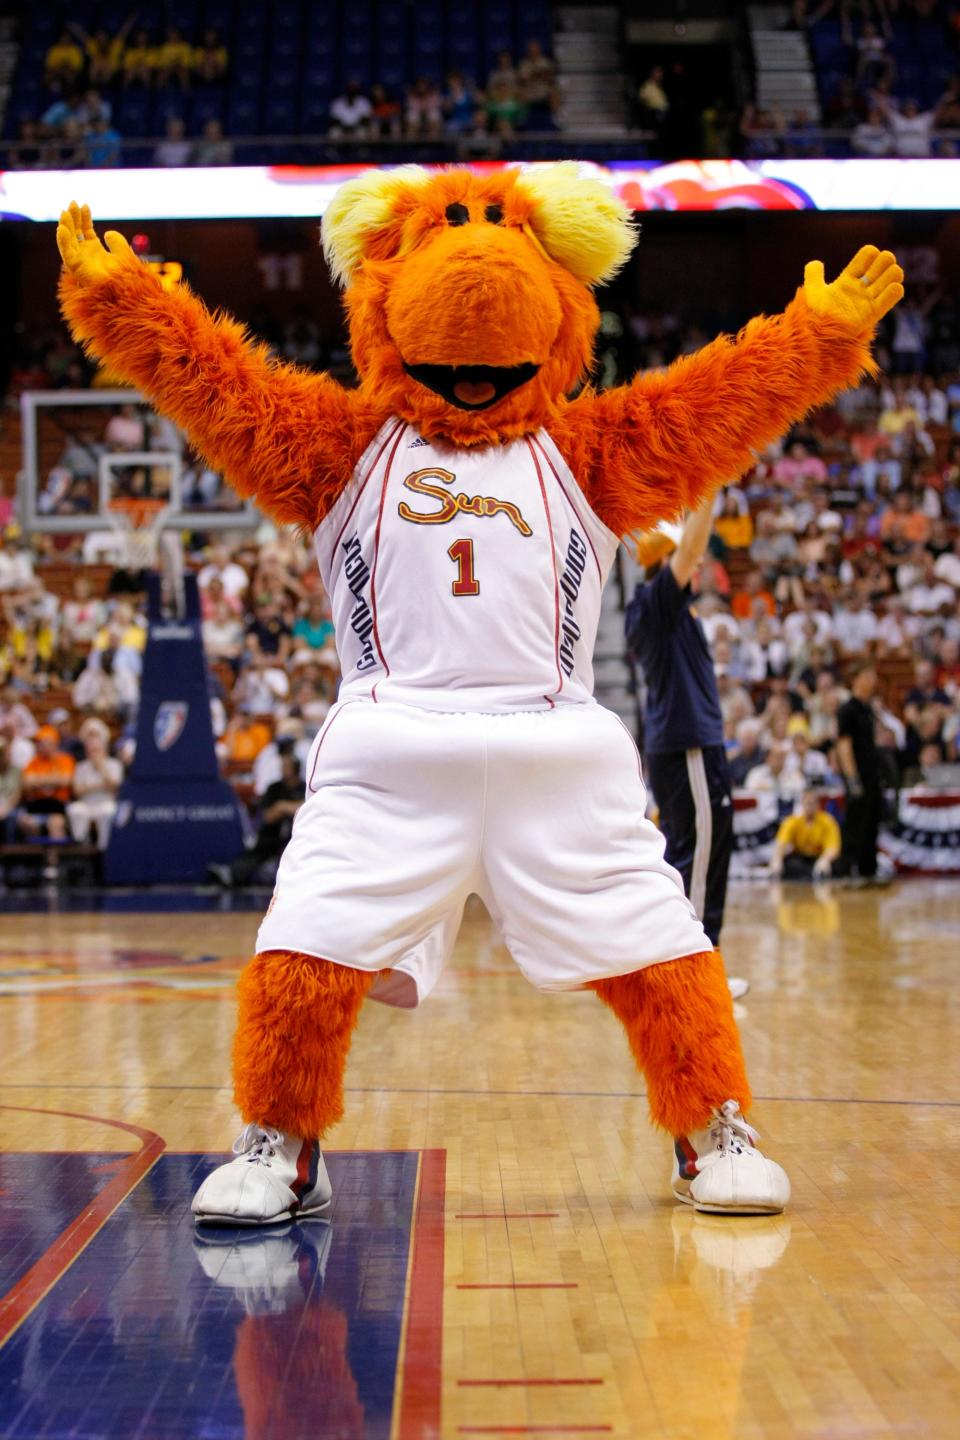 The Connecticut Sun mascot will entertain the crowds during time-outs of the upcoming WNBA season